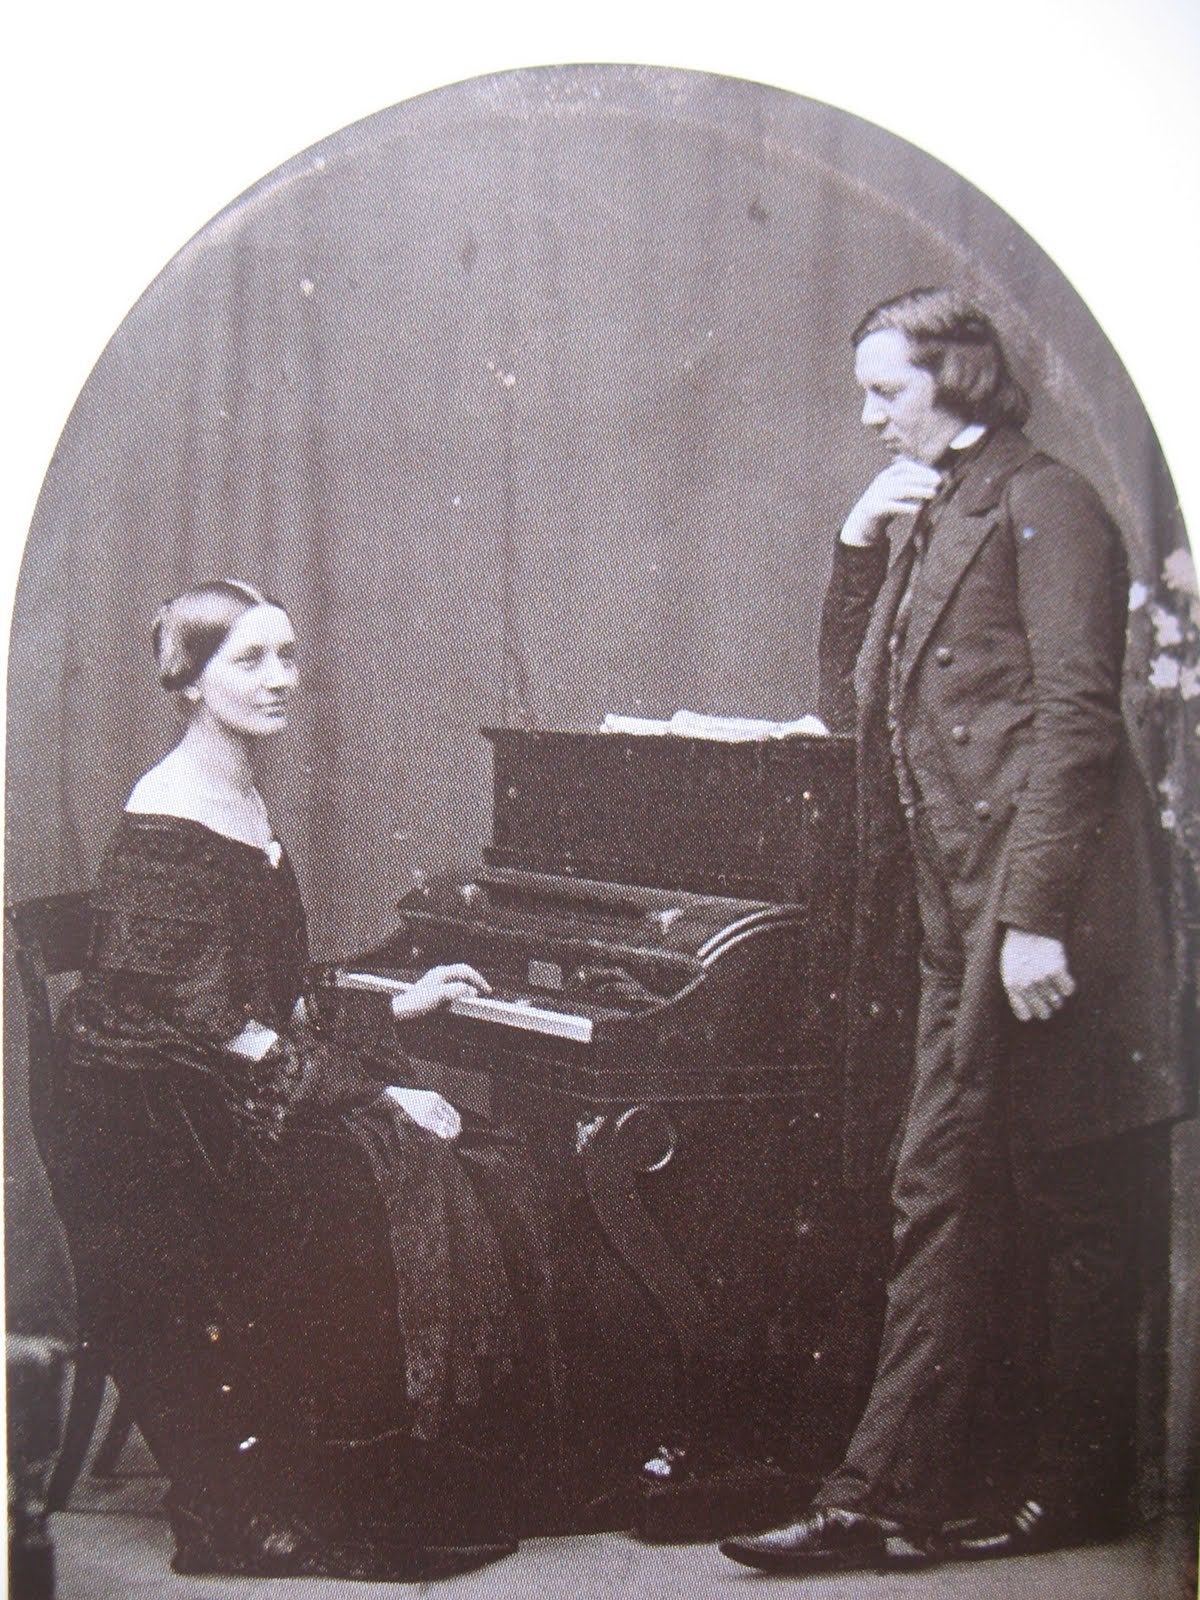 Image result for robert and clara schumann